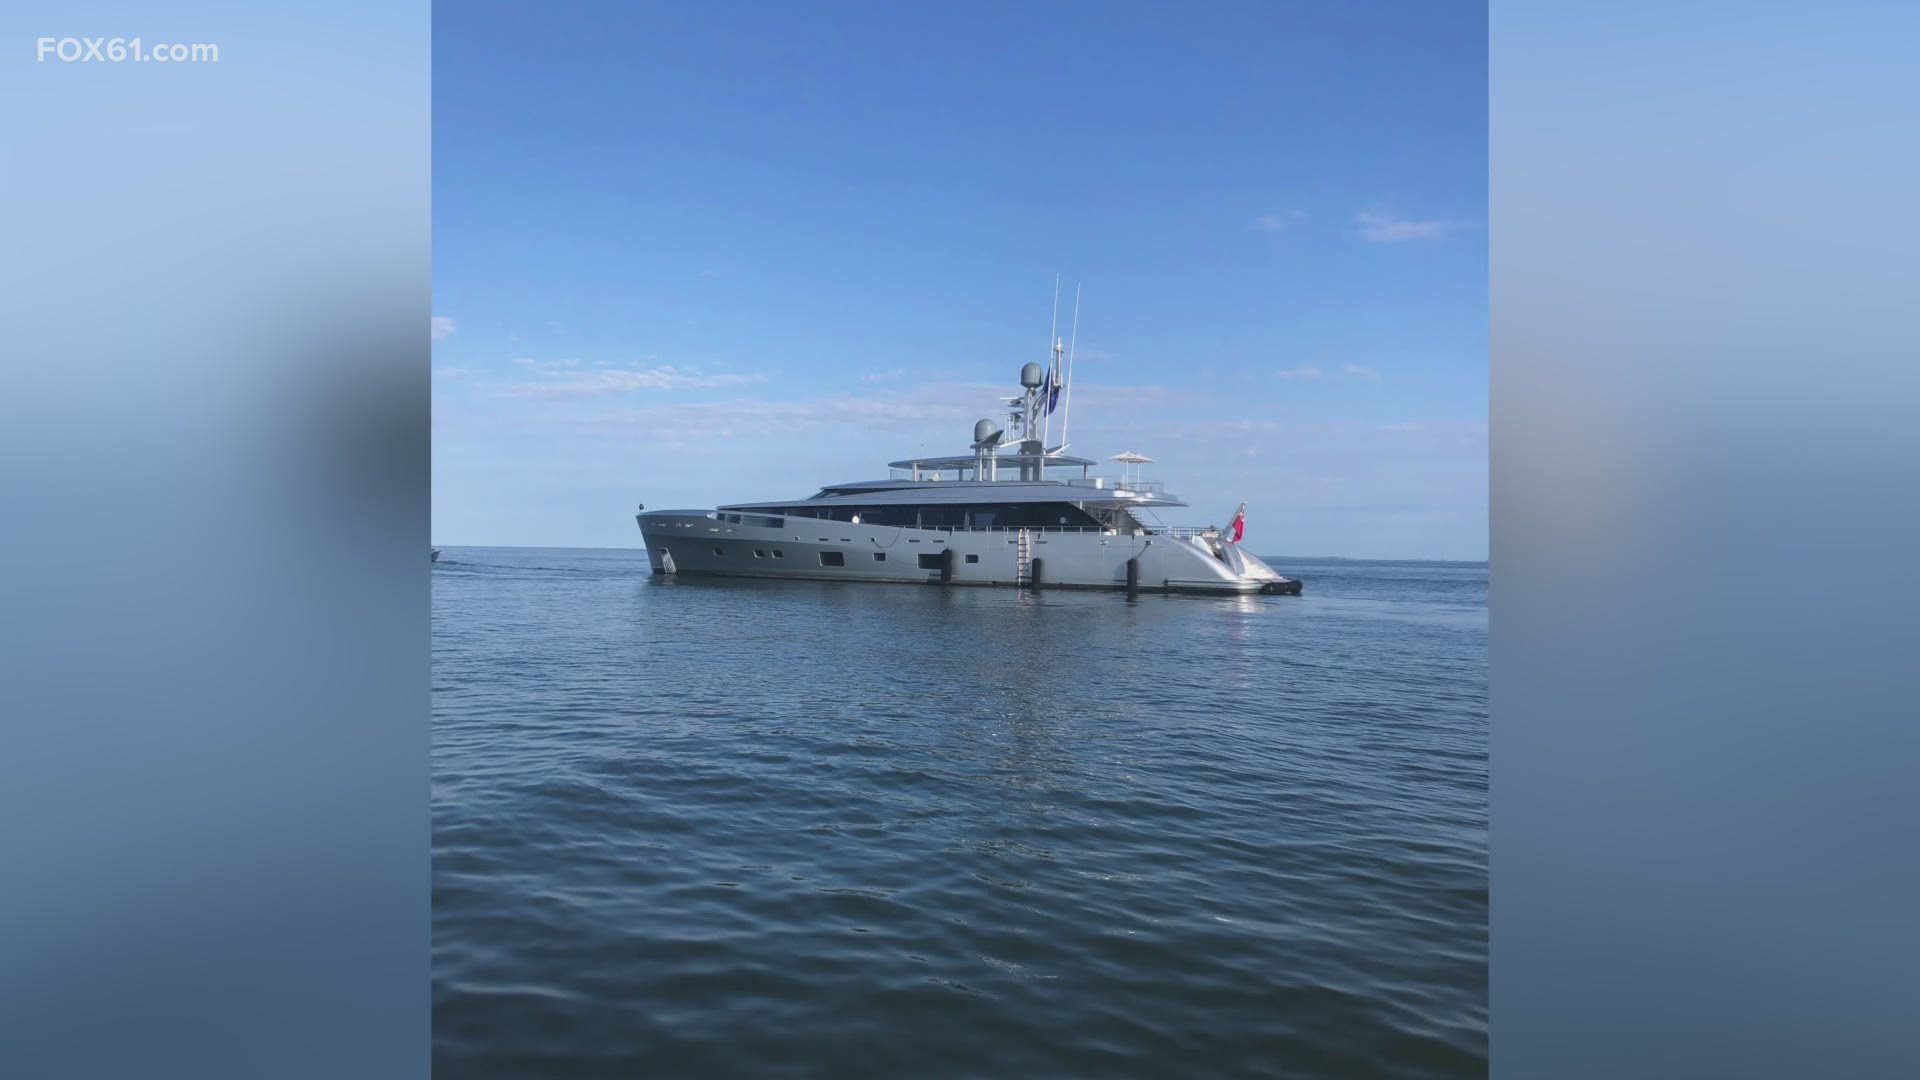 The yacht was reportedly brought to shore in Bridgeport by federal officials Friday morning where they continue their investigation.